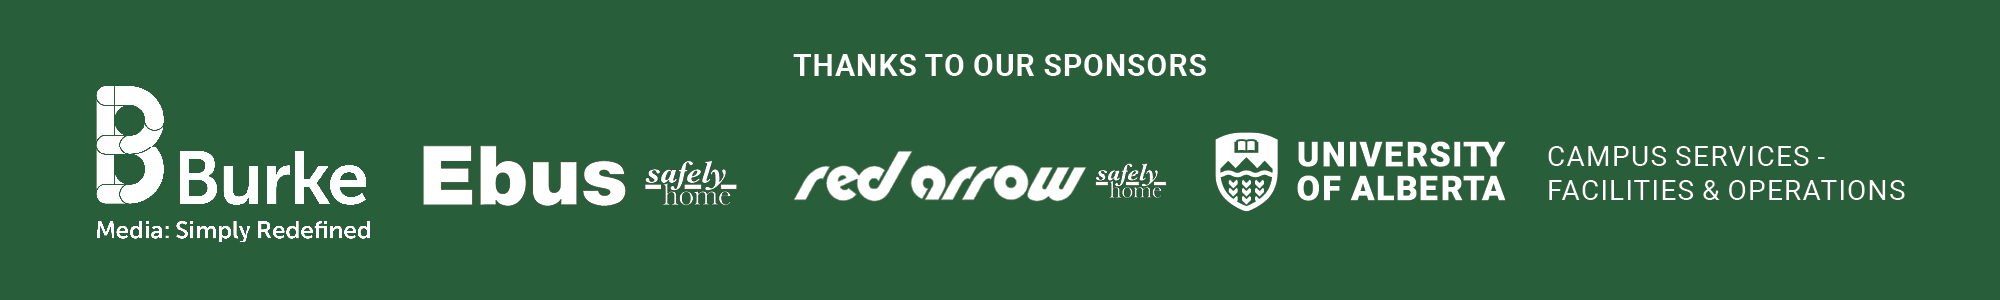 Thanks to our sponsors: Burke Media: Simply Redefined, Ebus: safely home, Red Arrow: safely home, University of Alberta, Campus Services - Facilities & Operations